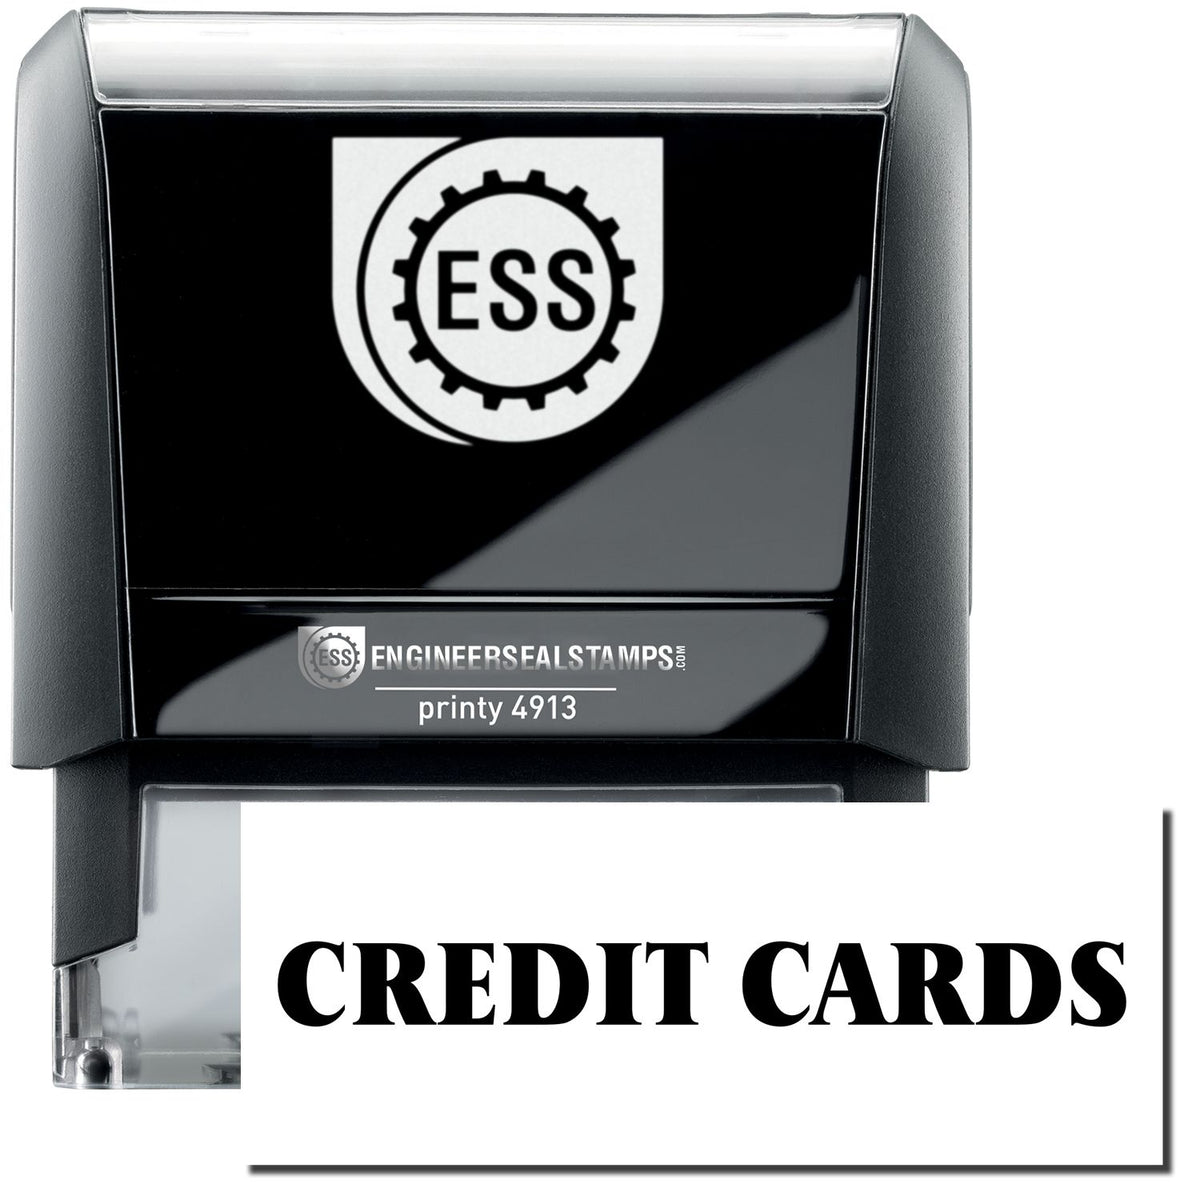 A self-inking stamp with a stamped image showing how the text &quot;CREDIT CARDS&quot; in a large bold font is displayed by it.